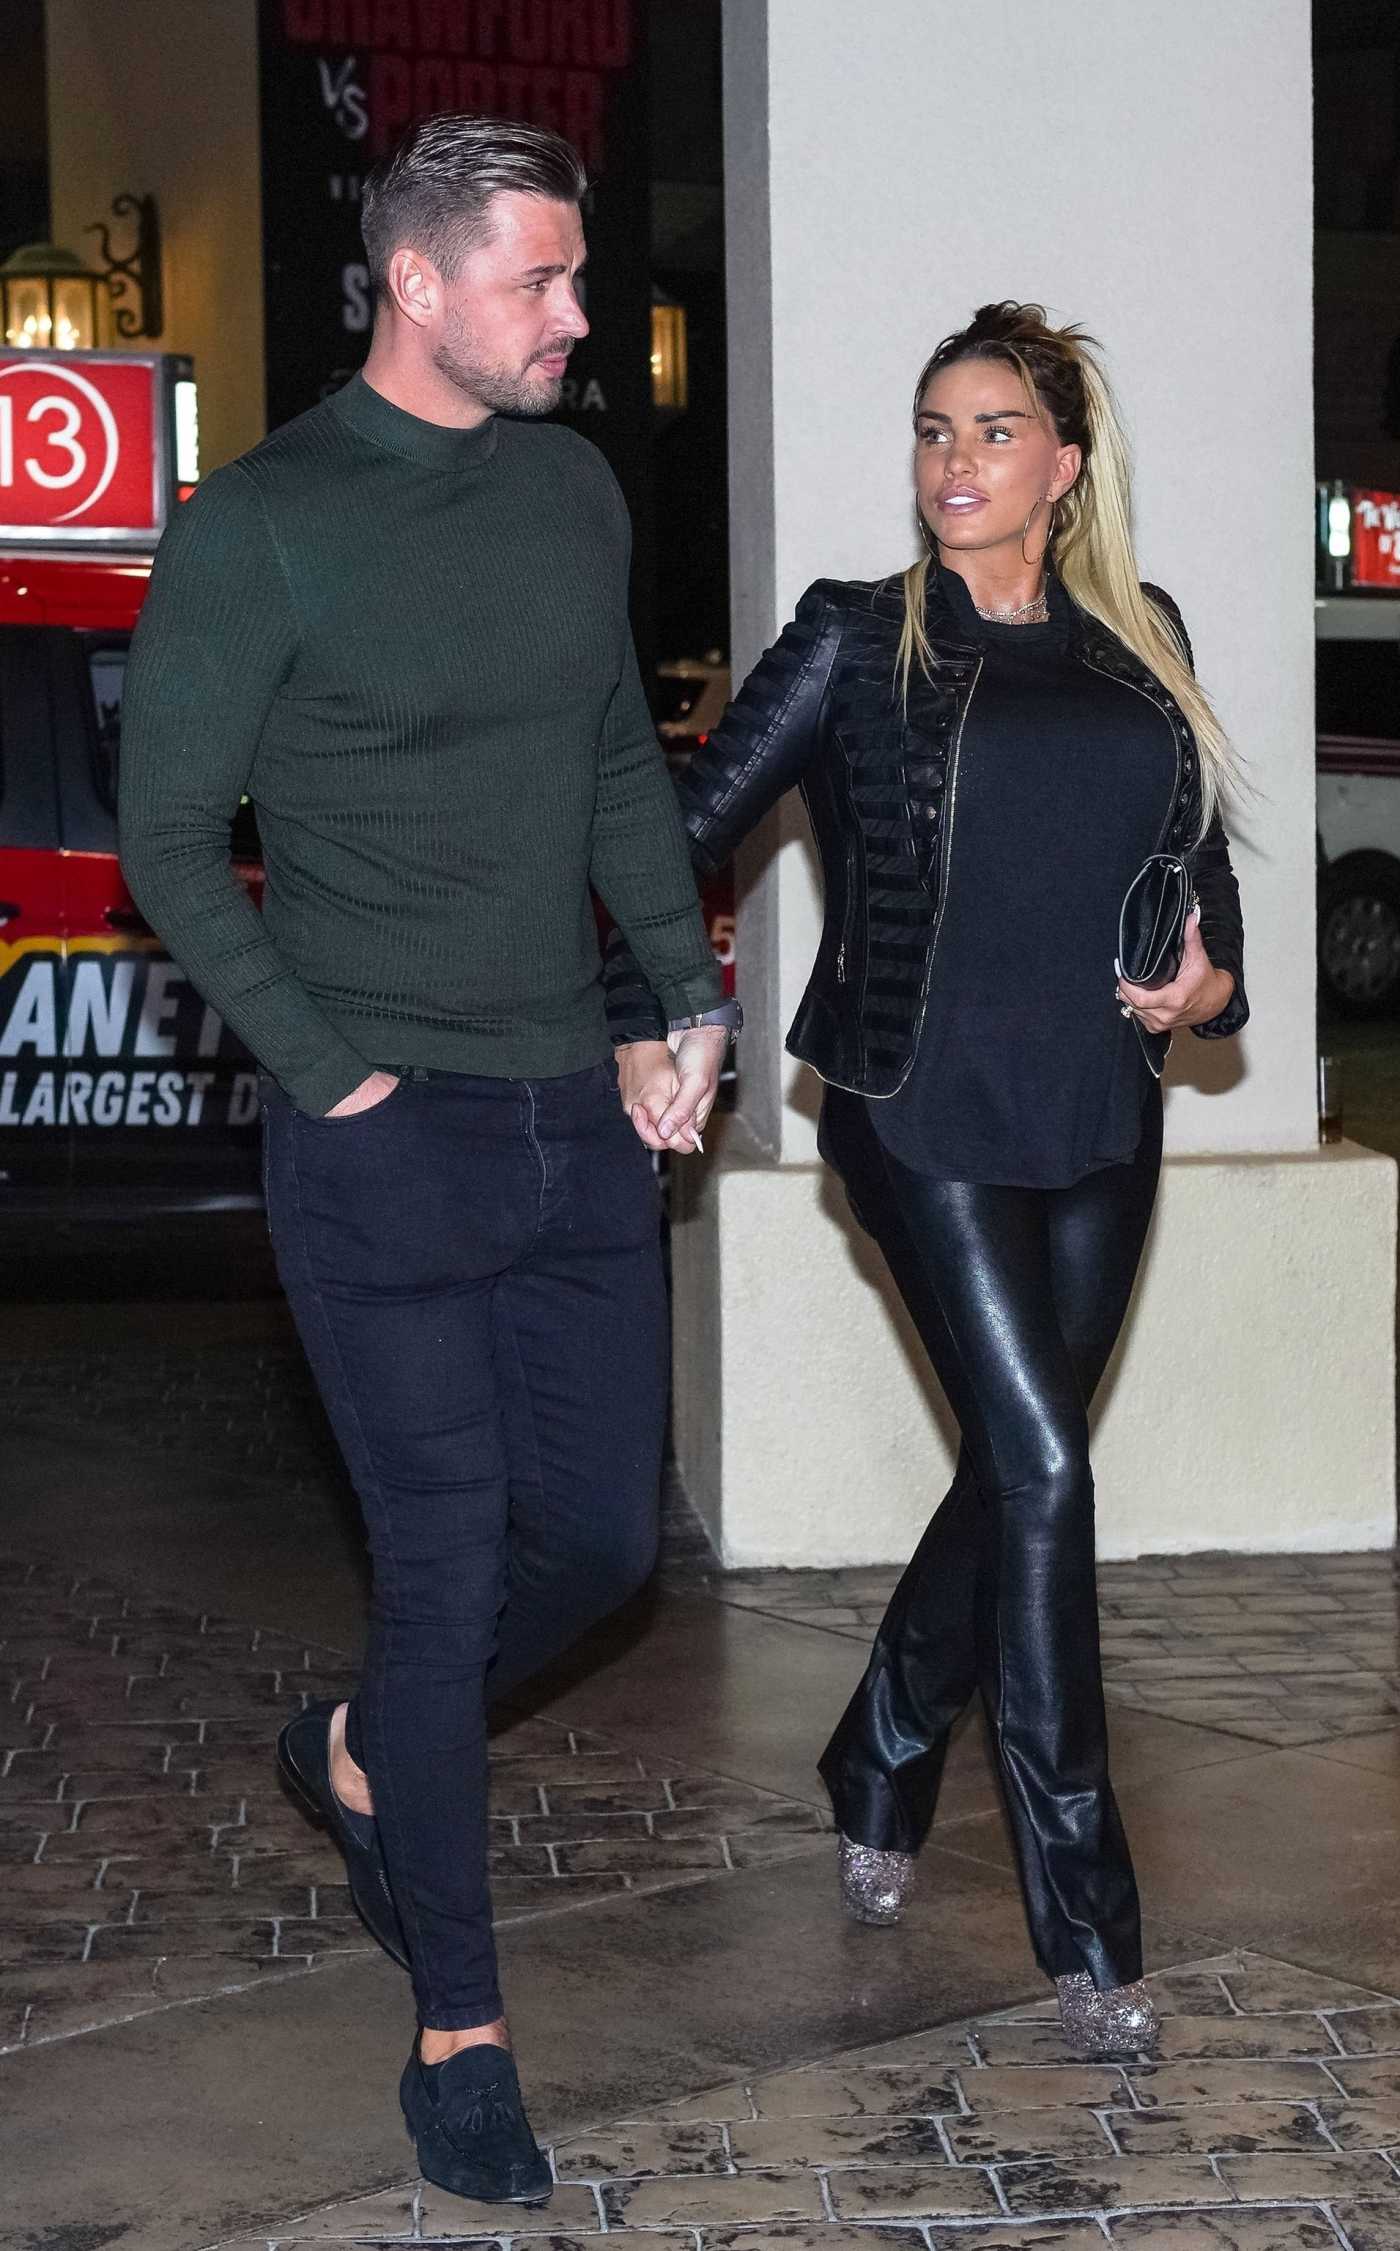 Katie Price in a Black Leather Pants Was Seen Out with her Fiance Carl Woods in Las Vegas 11/13/2021